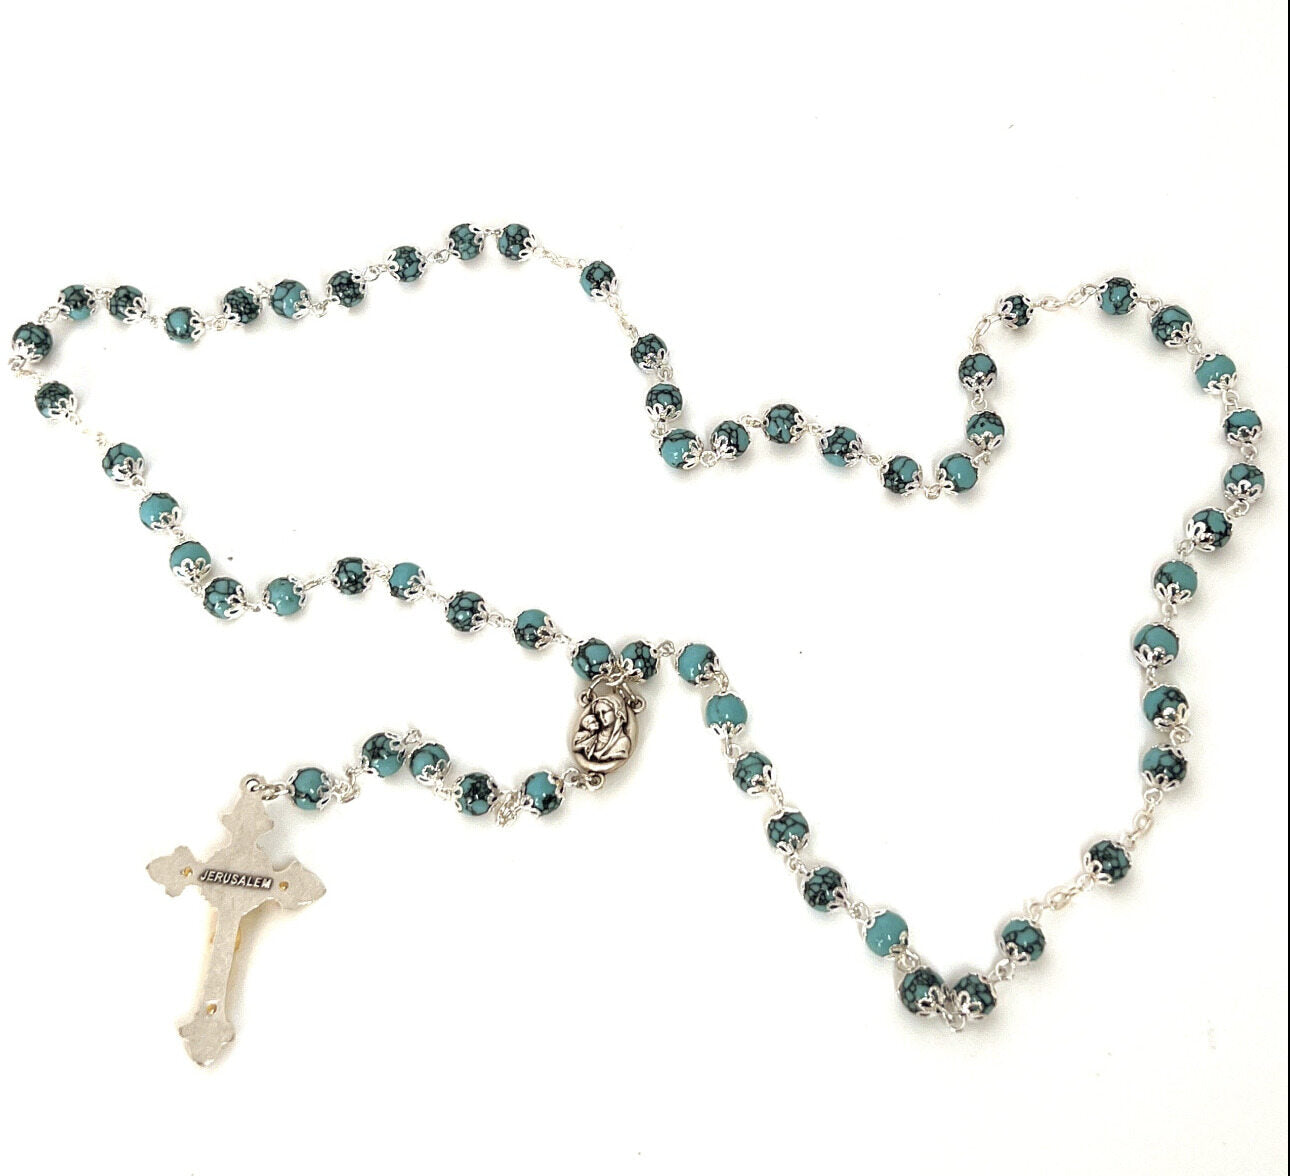 Rosary with Turquoise Stones, Metal Chain and 2" Crucifix, Heavy Blue Coral Stone from Holy Land